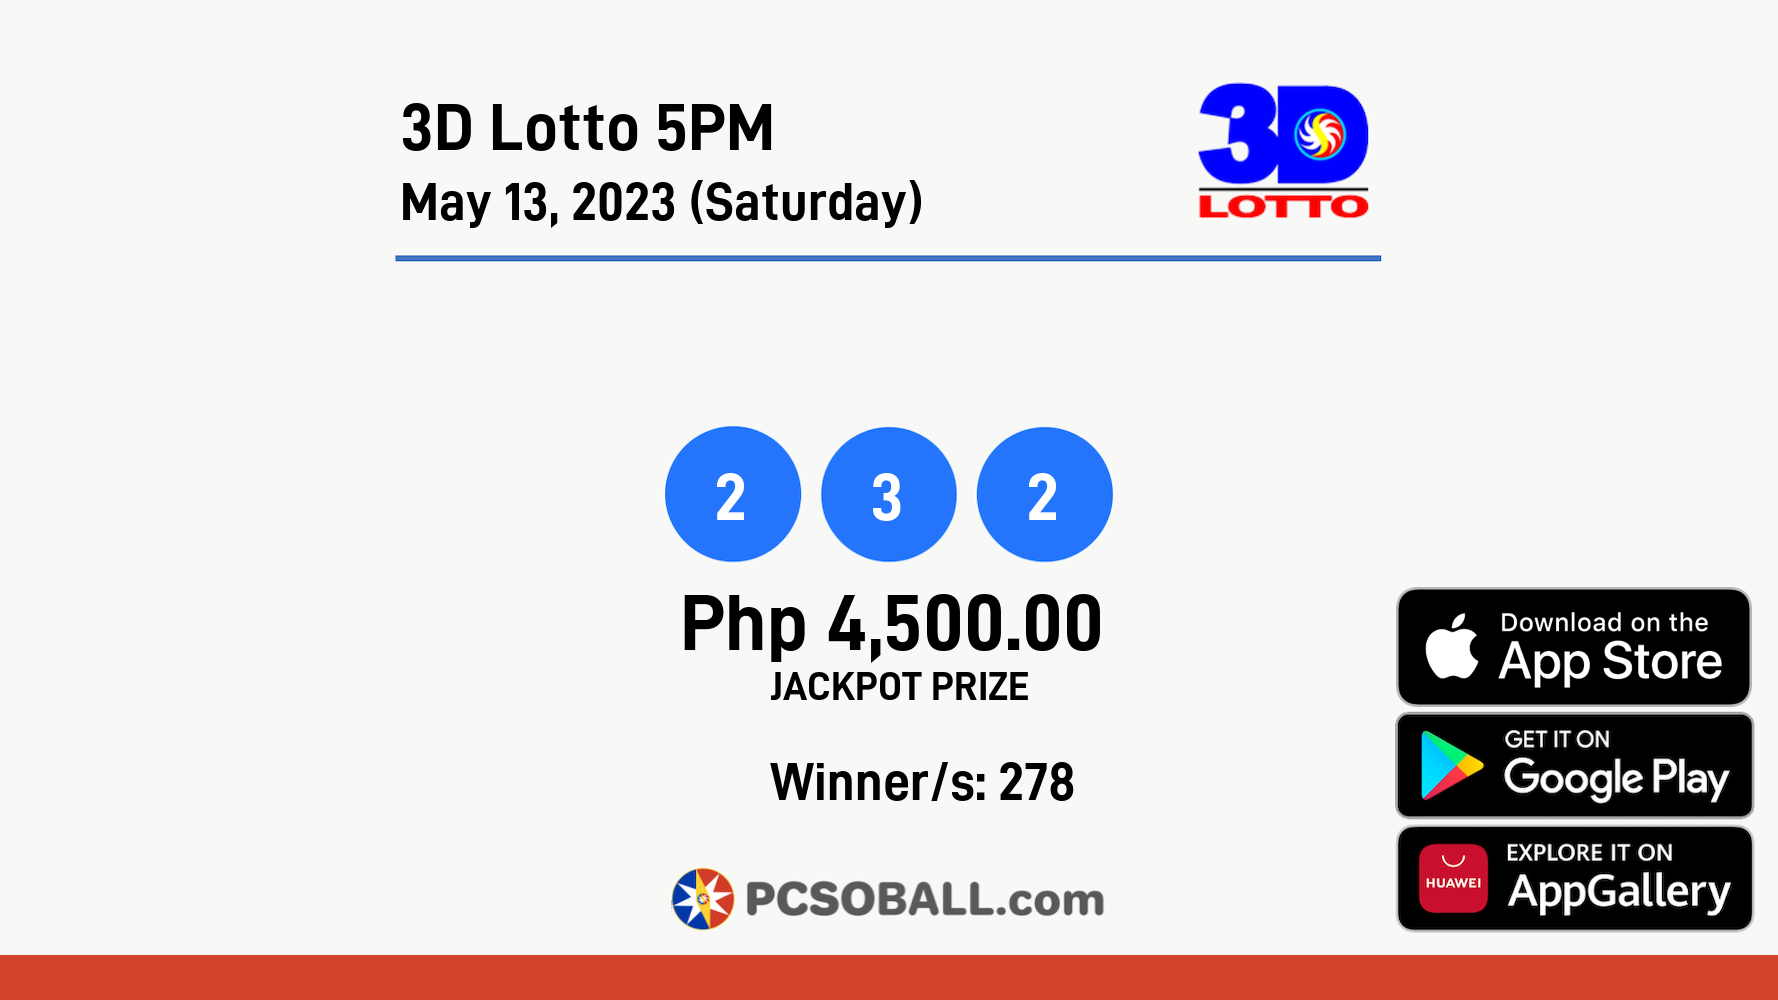 3D Lotto 5PM May 13, 2023 (Saturday) Result